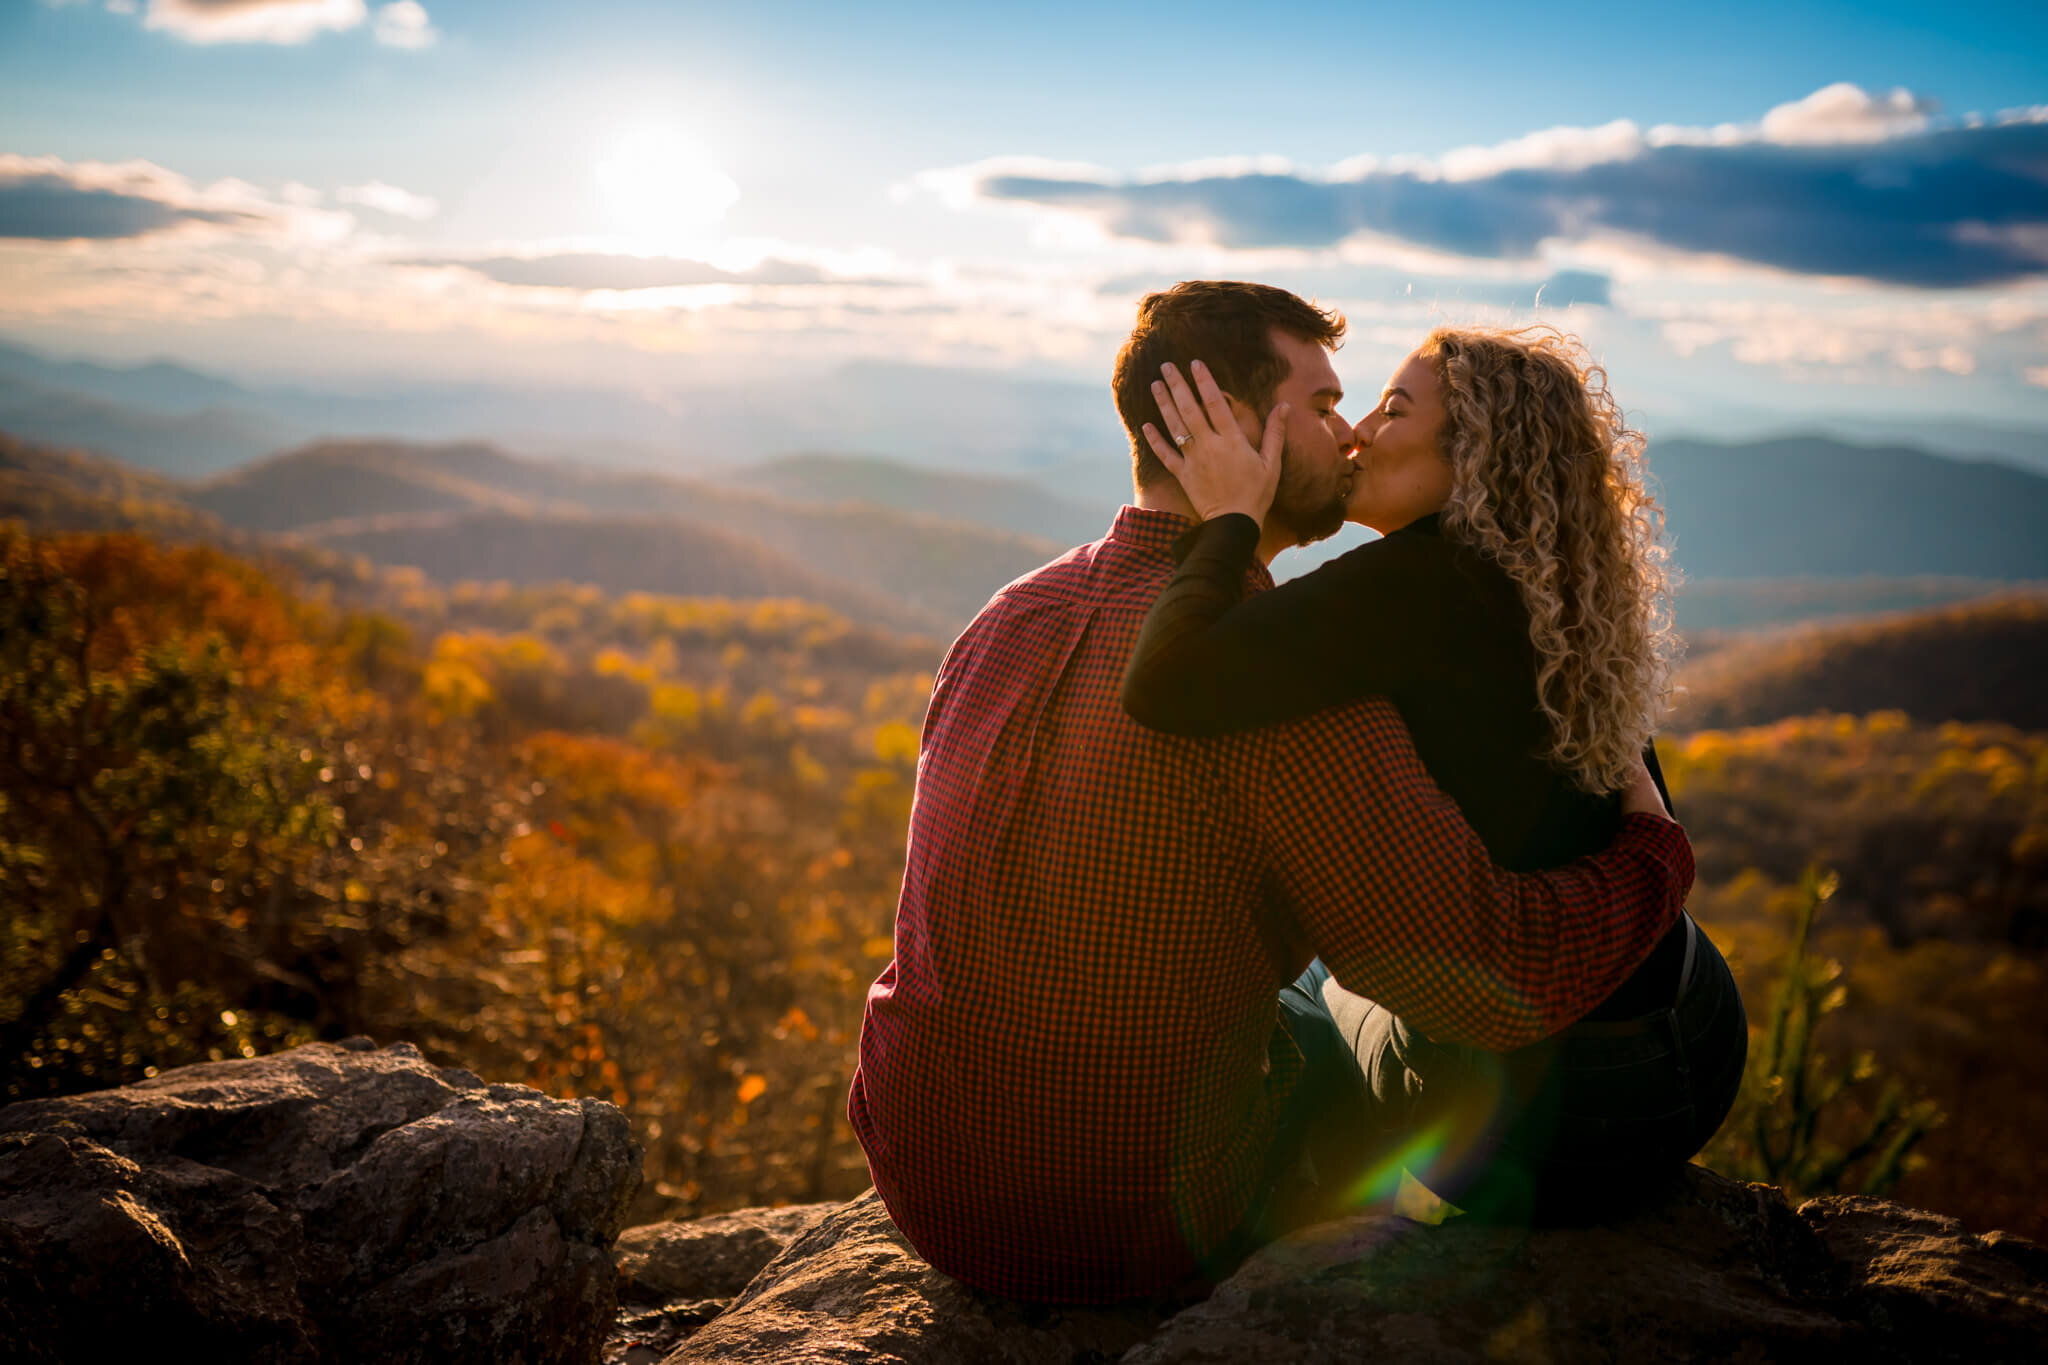 Surprise-Proposal-The-Point-Overlook-Shenandoah-National-Park-Photography-by-Bee-Two-Sweet-117.jpg